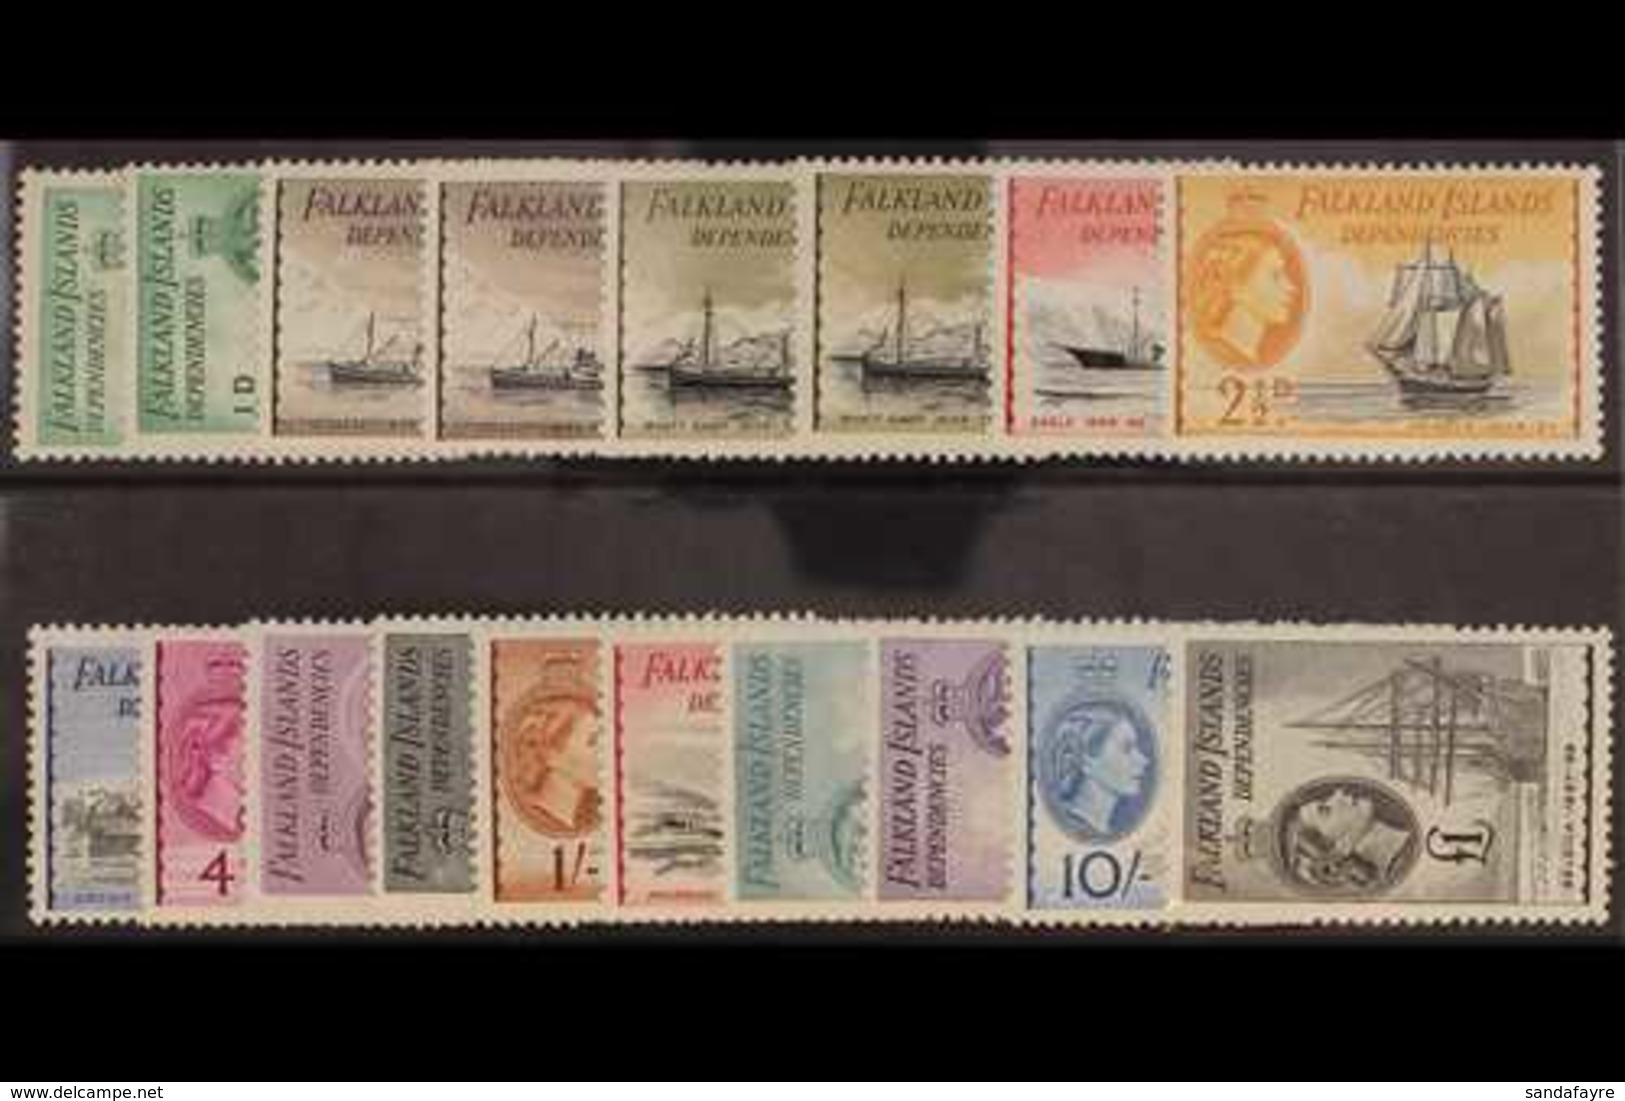 1954 Complete Set Including The DLR Printings,SG G26/40, G26a, 27b, 28a, Very Lighly Hinged Mint. (18 Stamps) For More I - Falklandeilanden